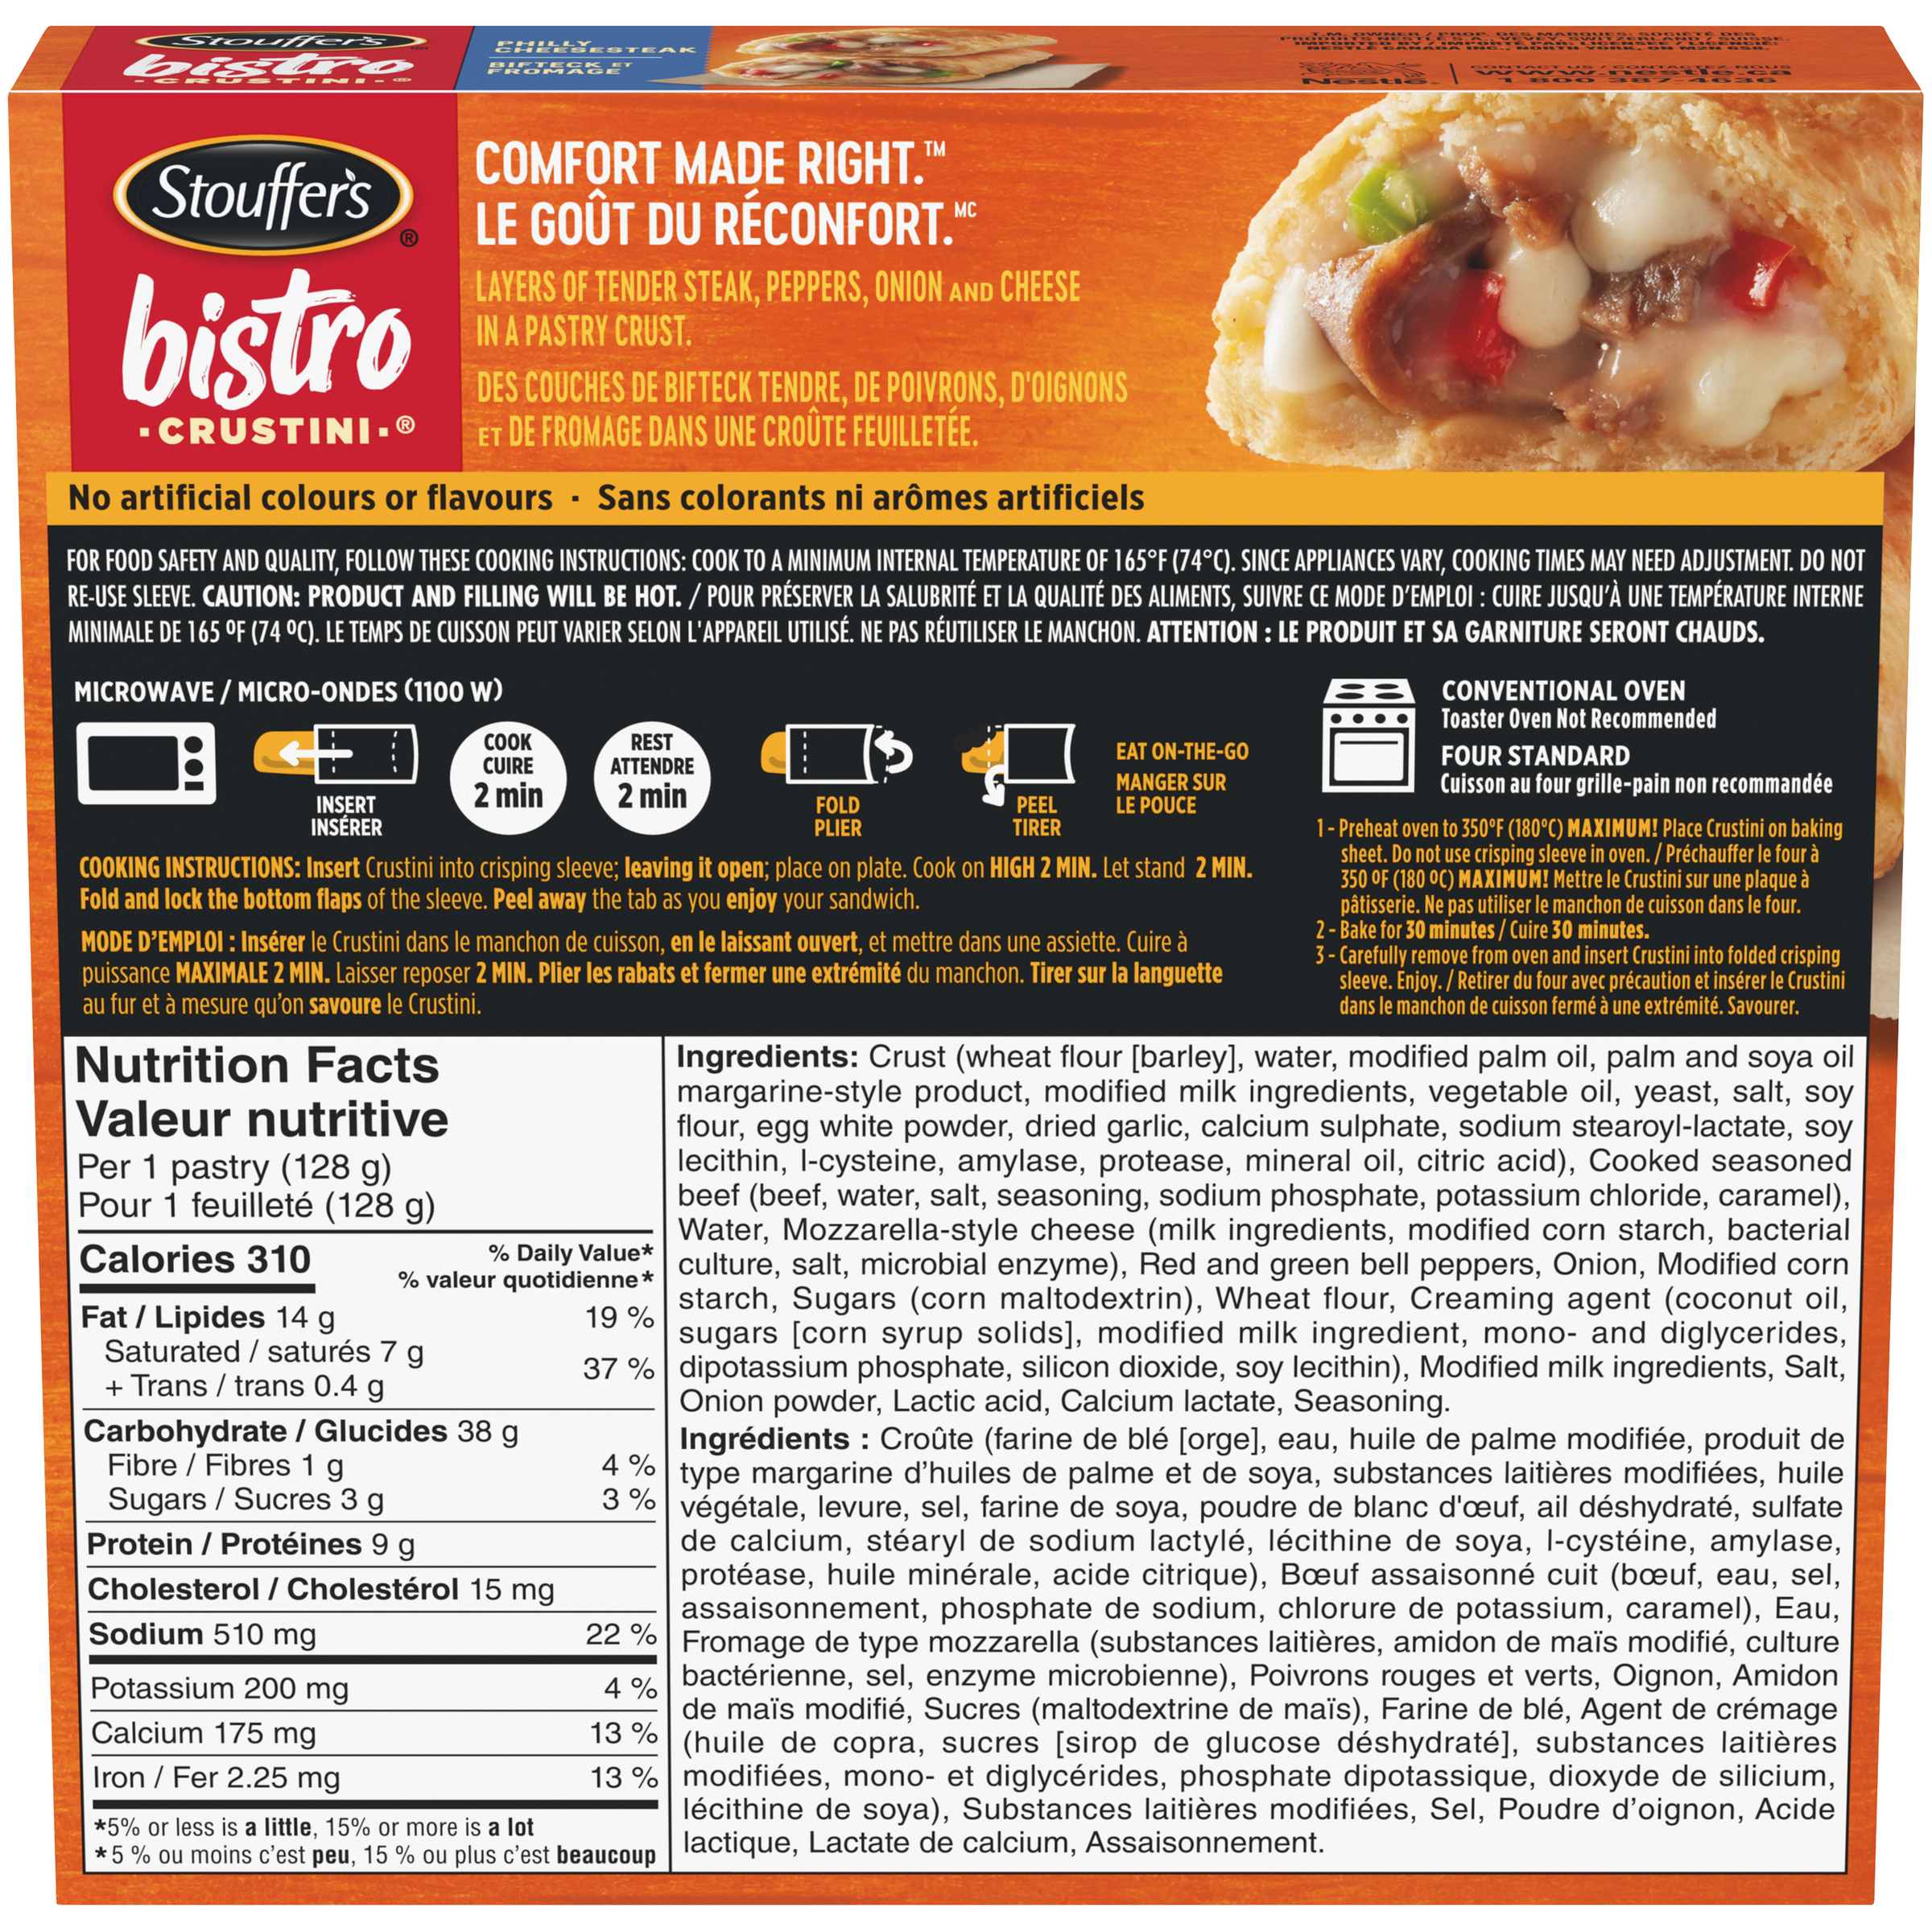 STOUFFER'S Bistro Crustini Philly Cheesesteak back